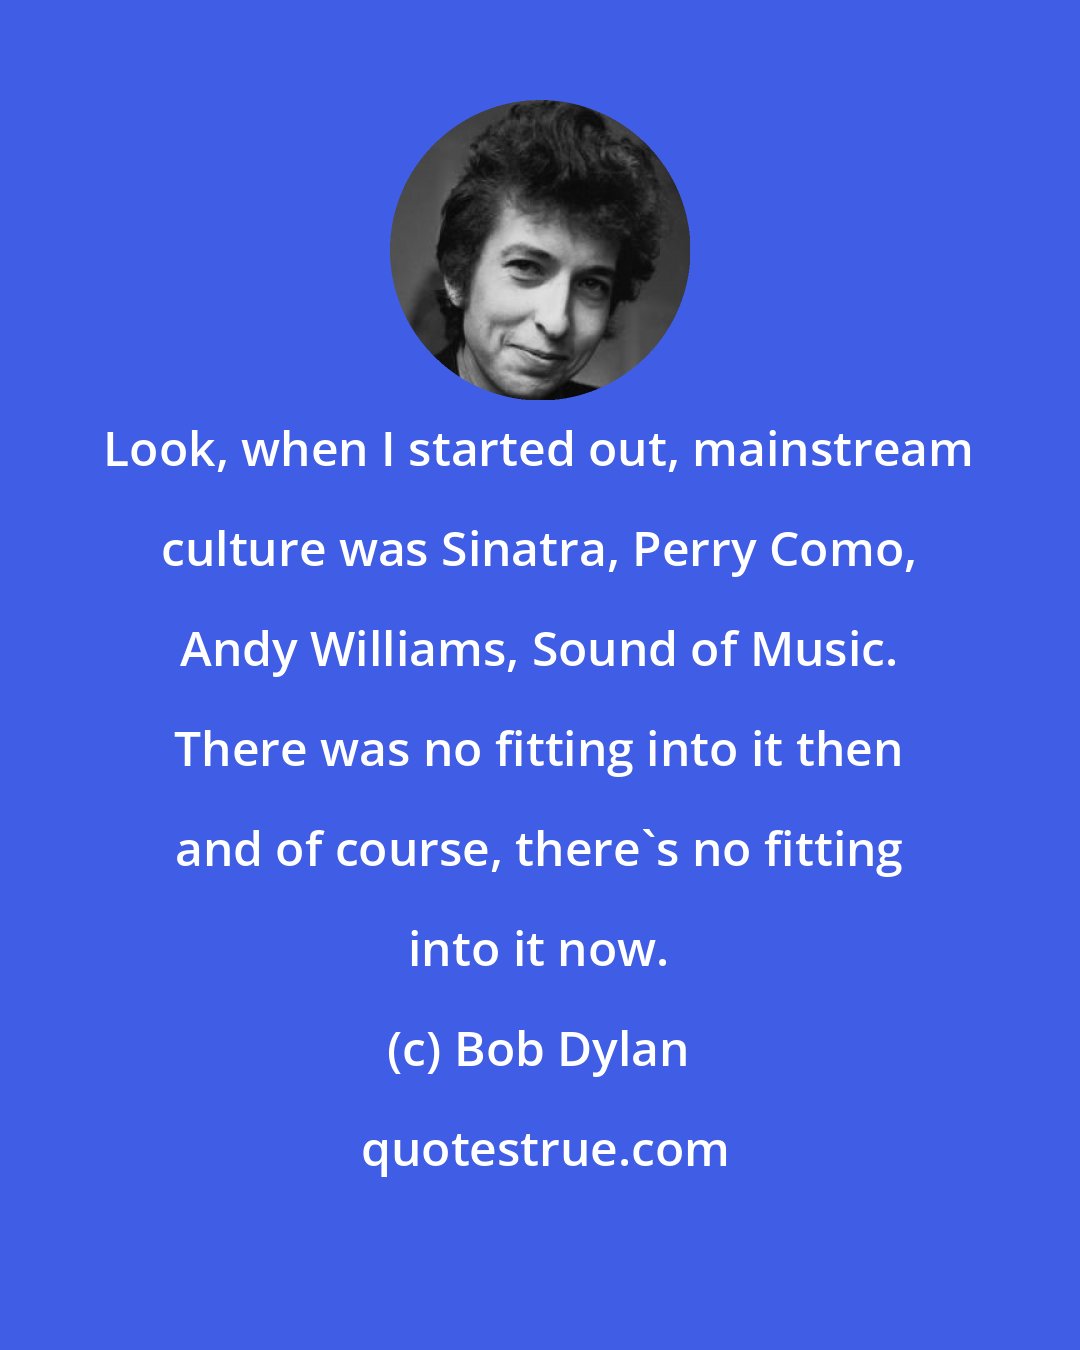 Bob Dylan: Look, when I started out, mainstream culture was Sinatra, Perry Como, Andy Williams, Sound of Music. There was no fitting into it then and of course, there's no fitting into it now.